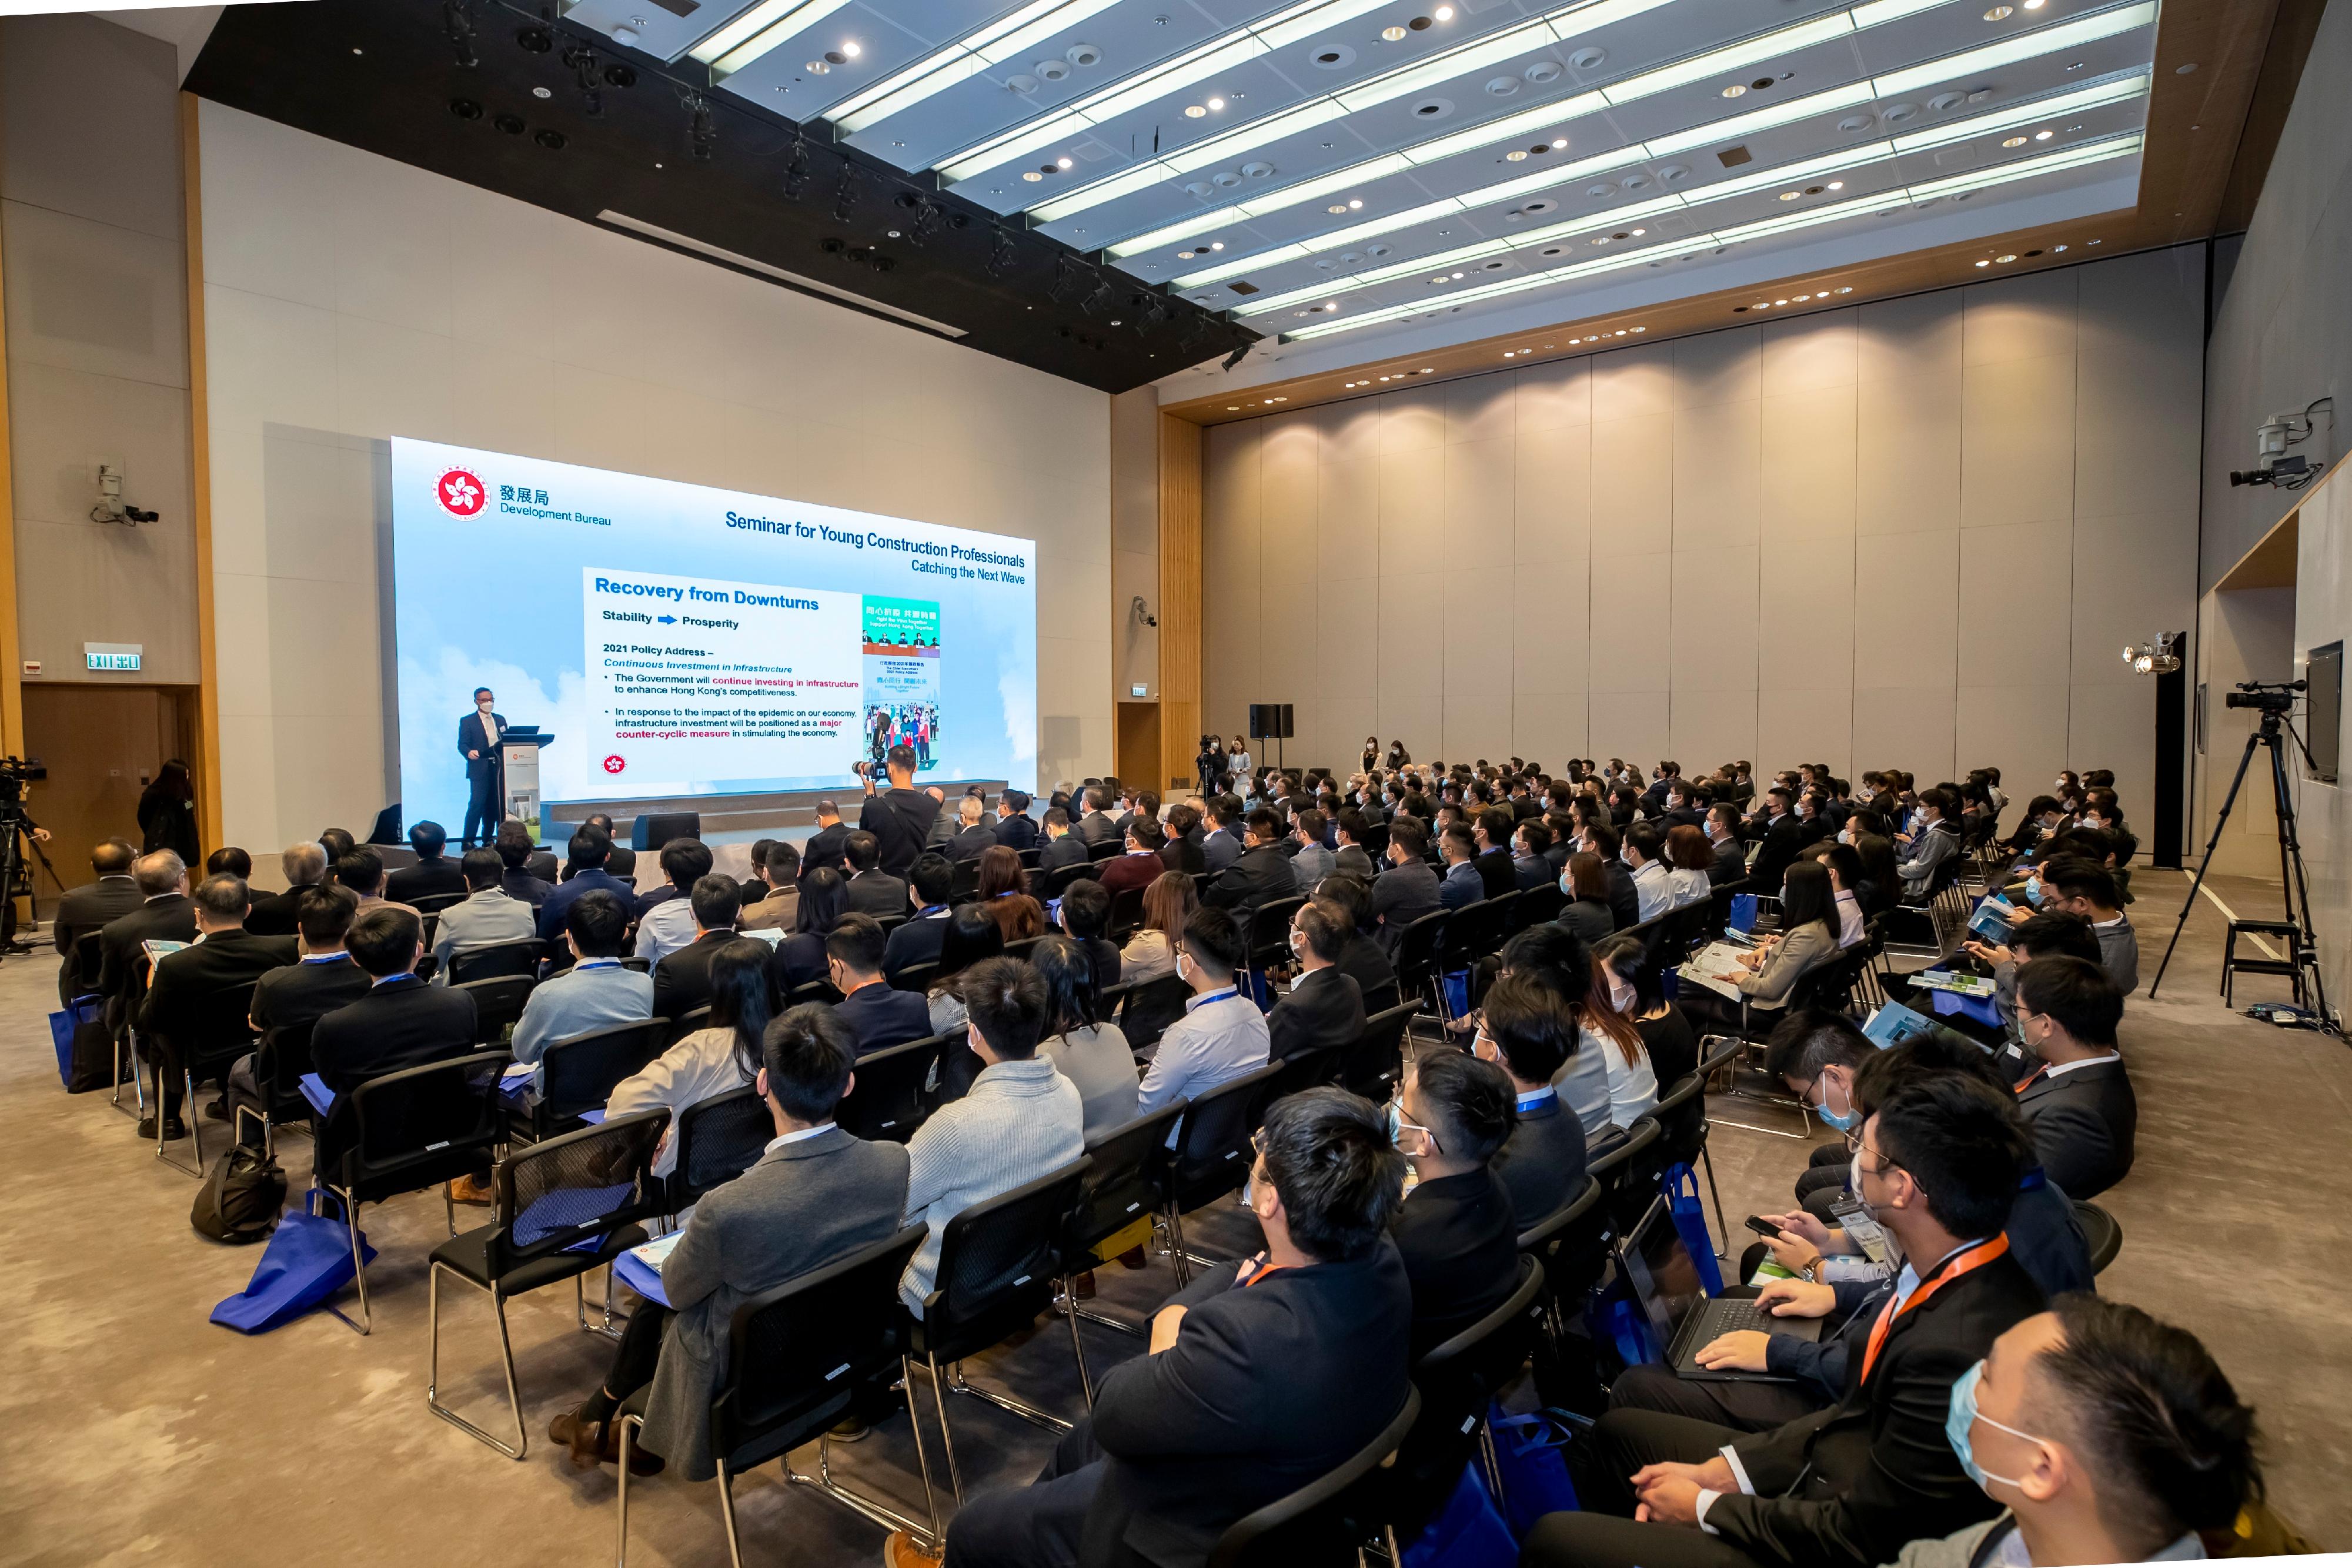 The Development Bureau today (December 1) held the seminar for young construction professionals, with the theme "Catching the Next Wave". About 200 young construction professionals and stakeholders attended the seminar.